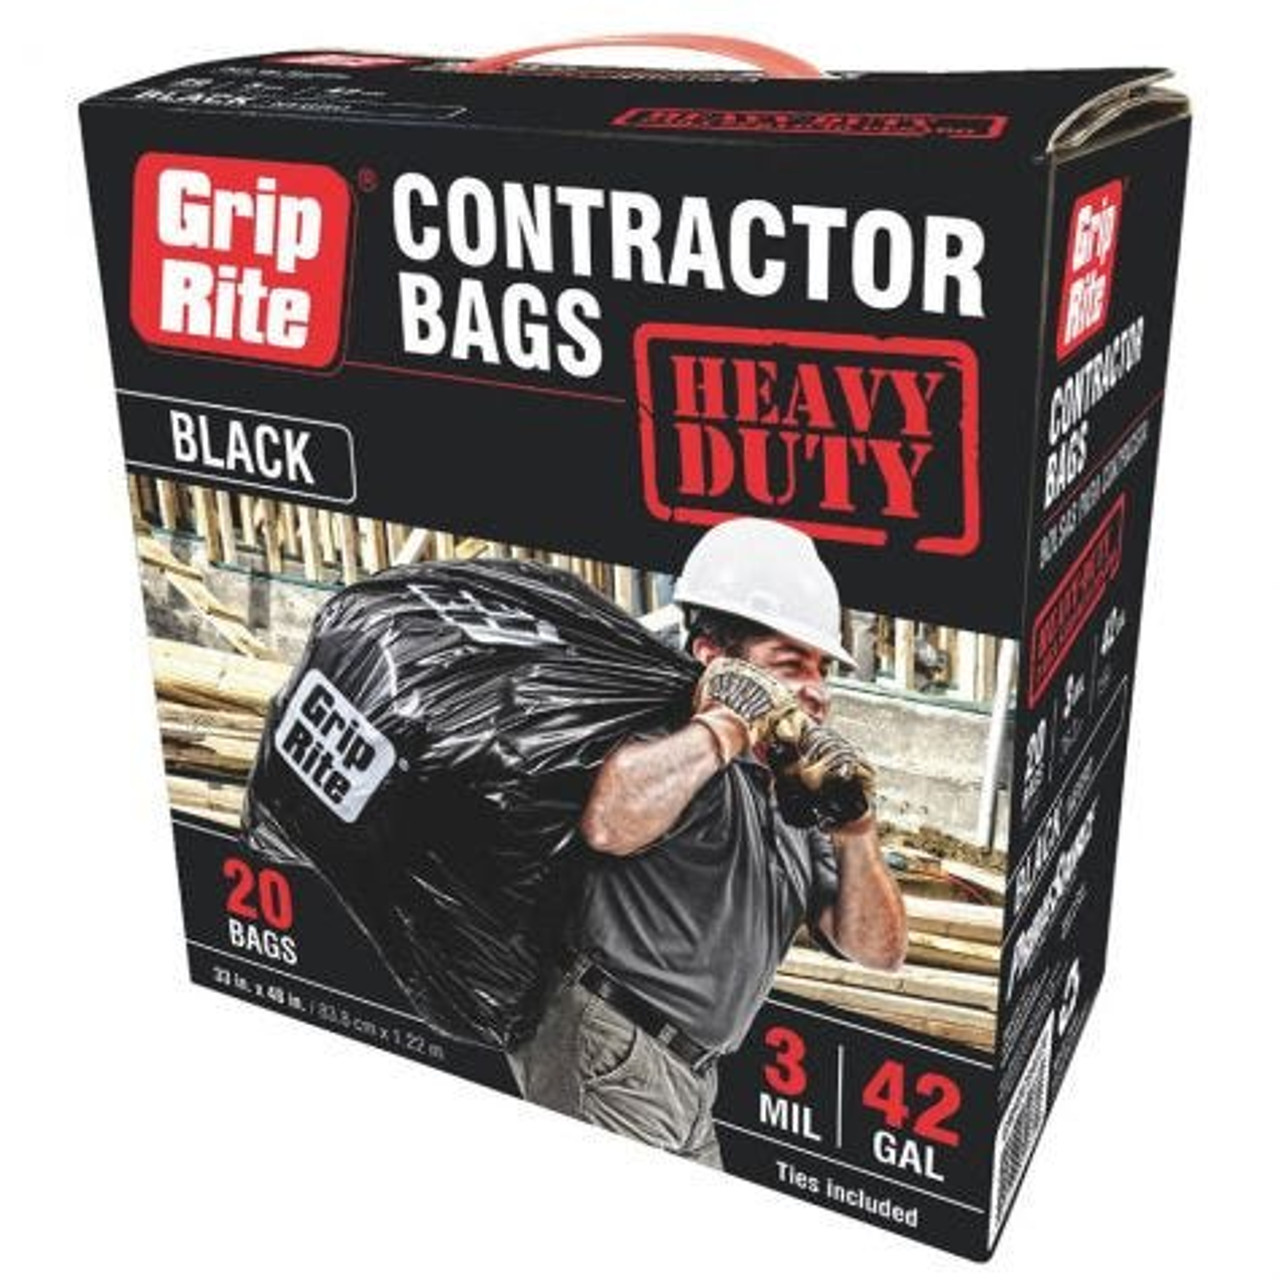 https://cdn11.bigcommerce.com/s-bi1m238212/images/stencil/1280x1280/products/62378/22675/Grip_Rite_GRHDCBAG20_42_Gallon_Heavy_Duty_Contractor_Garbage_Bags_20_per_Box__15074.1666888559.jpg?c=1